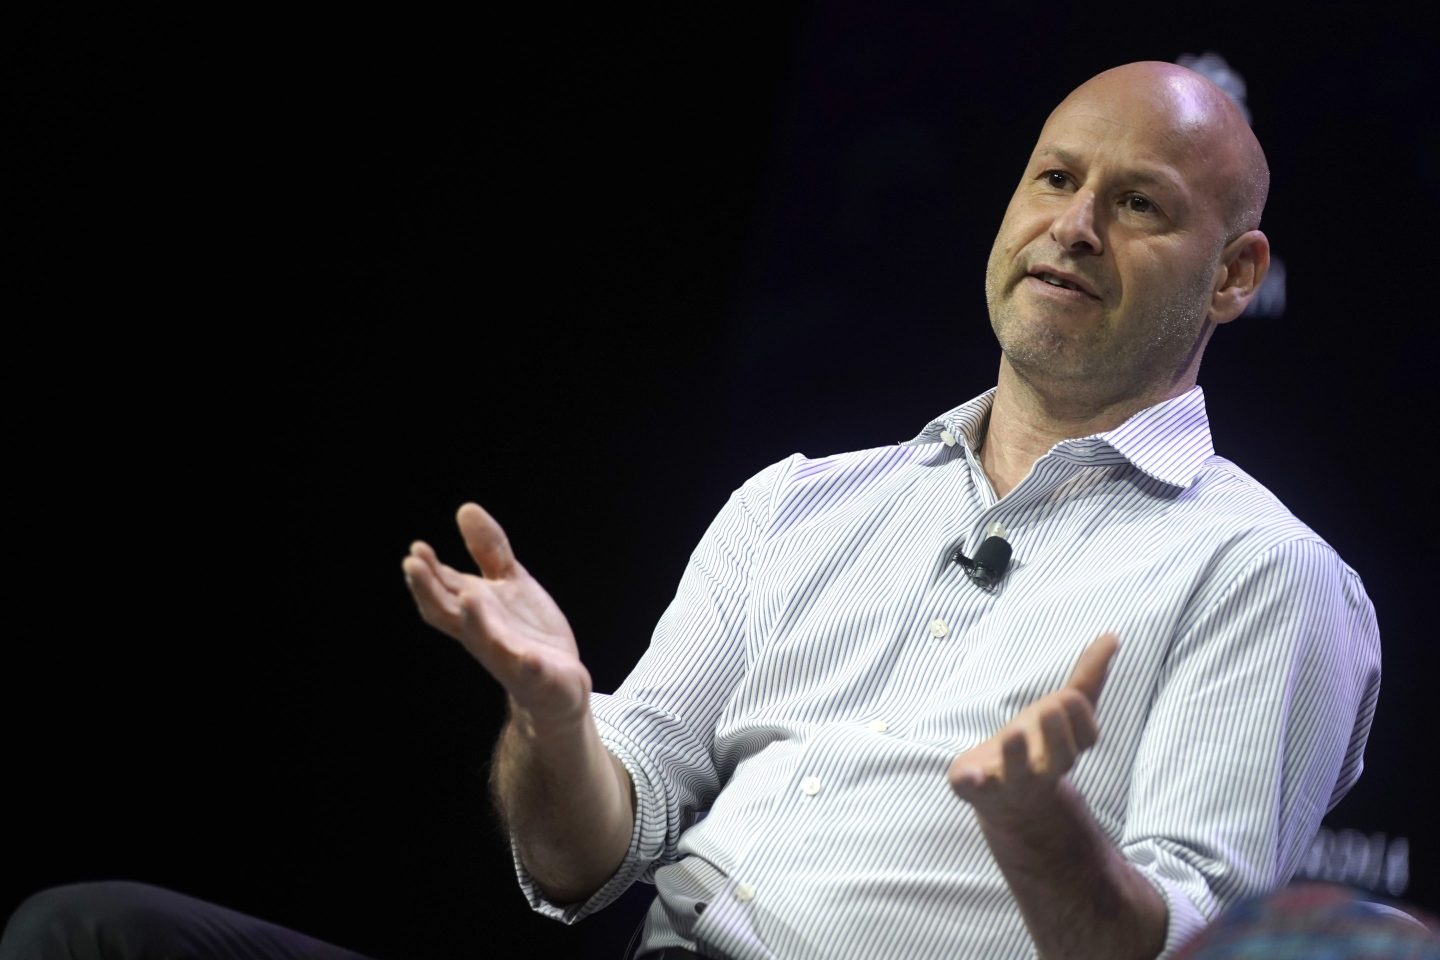 NEW YORK, NEW YORK &#8211; SEPTEMBER 24: Joseph Lubin, Co-Founder, Ethereum; Founder, Consensys, speaks onstage during the 2019 Concordia Annual Summit &#8211; Day 2 at Grand Hyatt New York on September 24, 2019 in New York City. (Photo by Riccardo Savi/Getty Images for Concordia Summit)